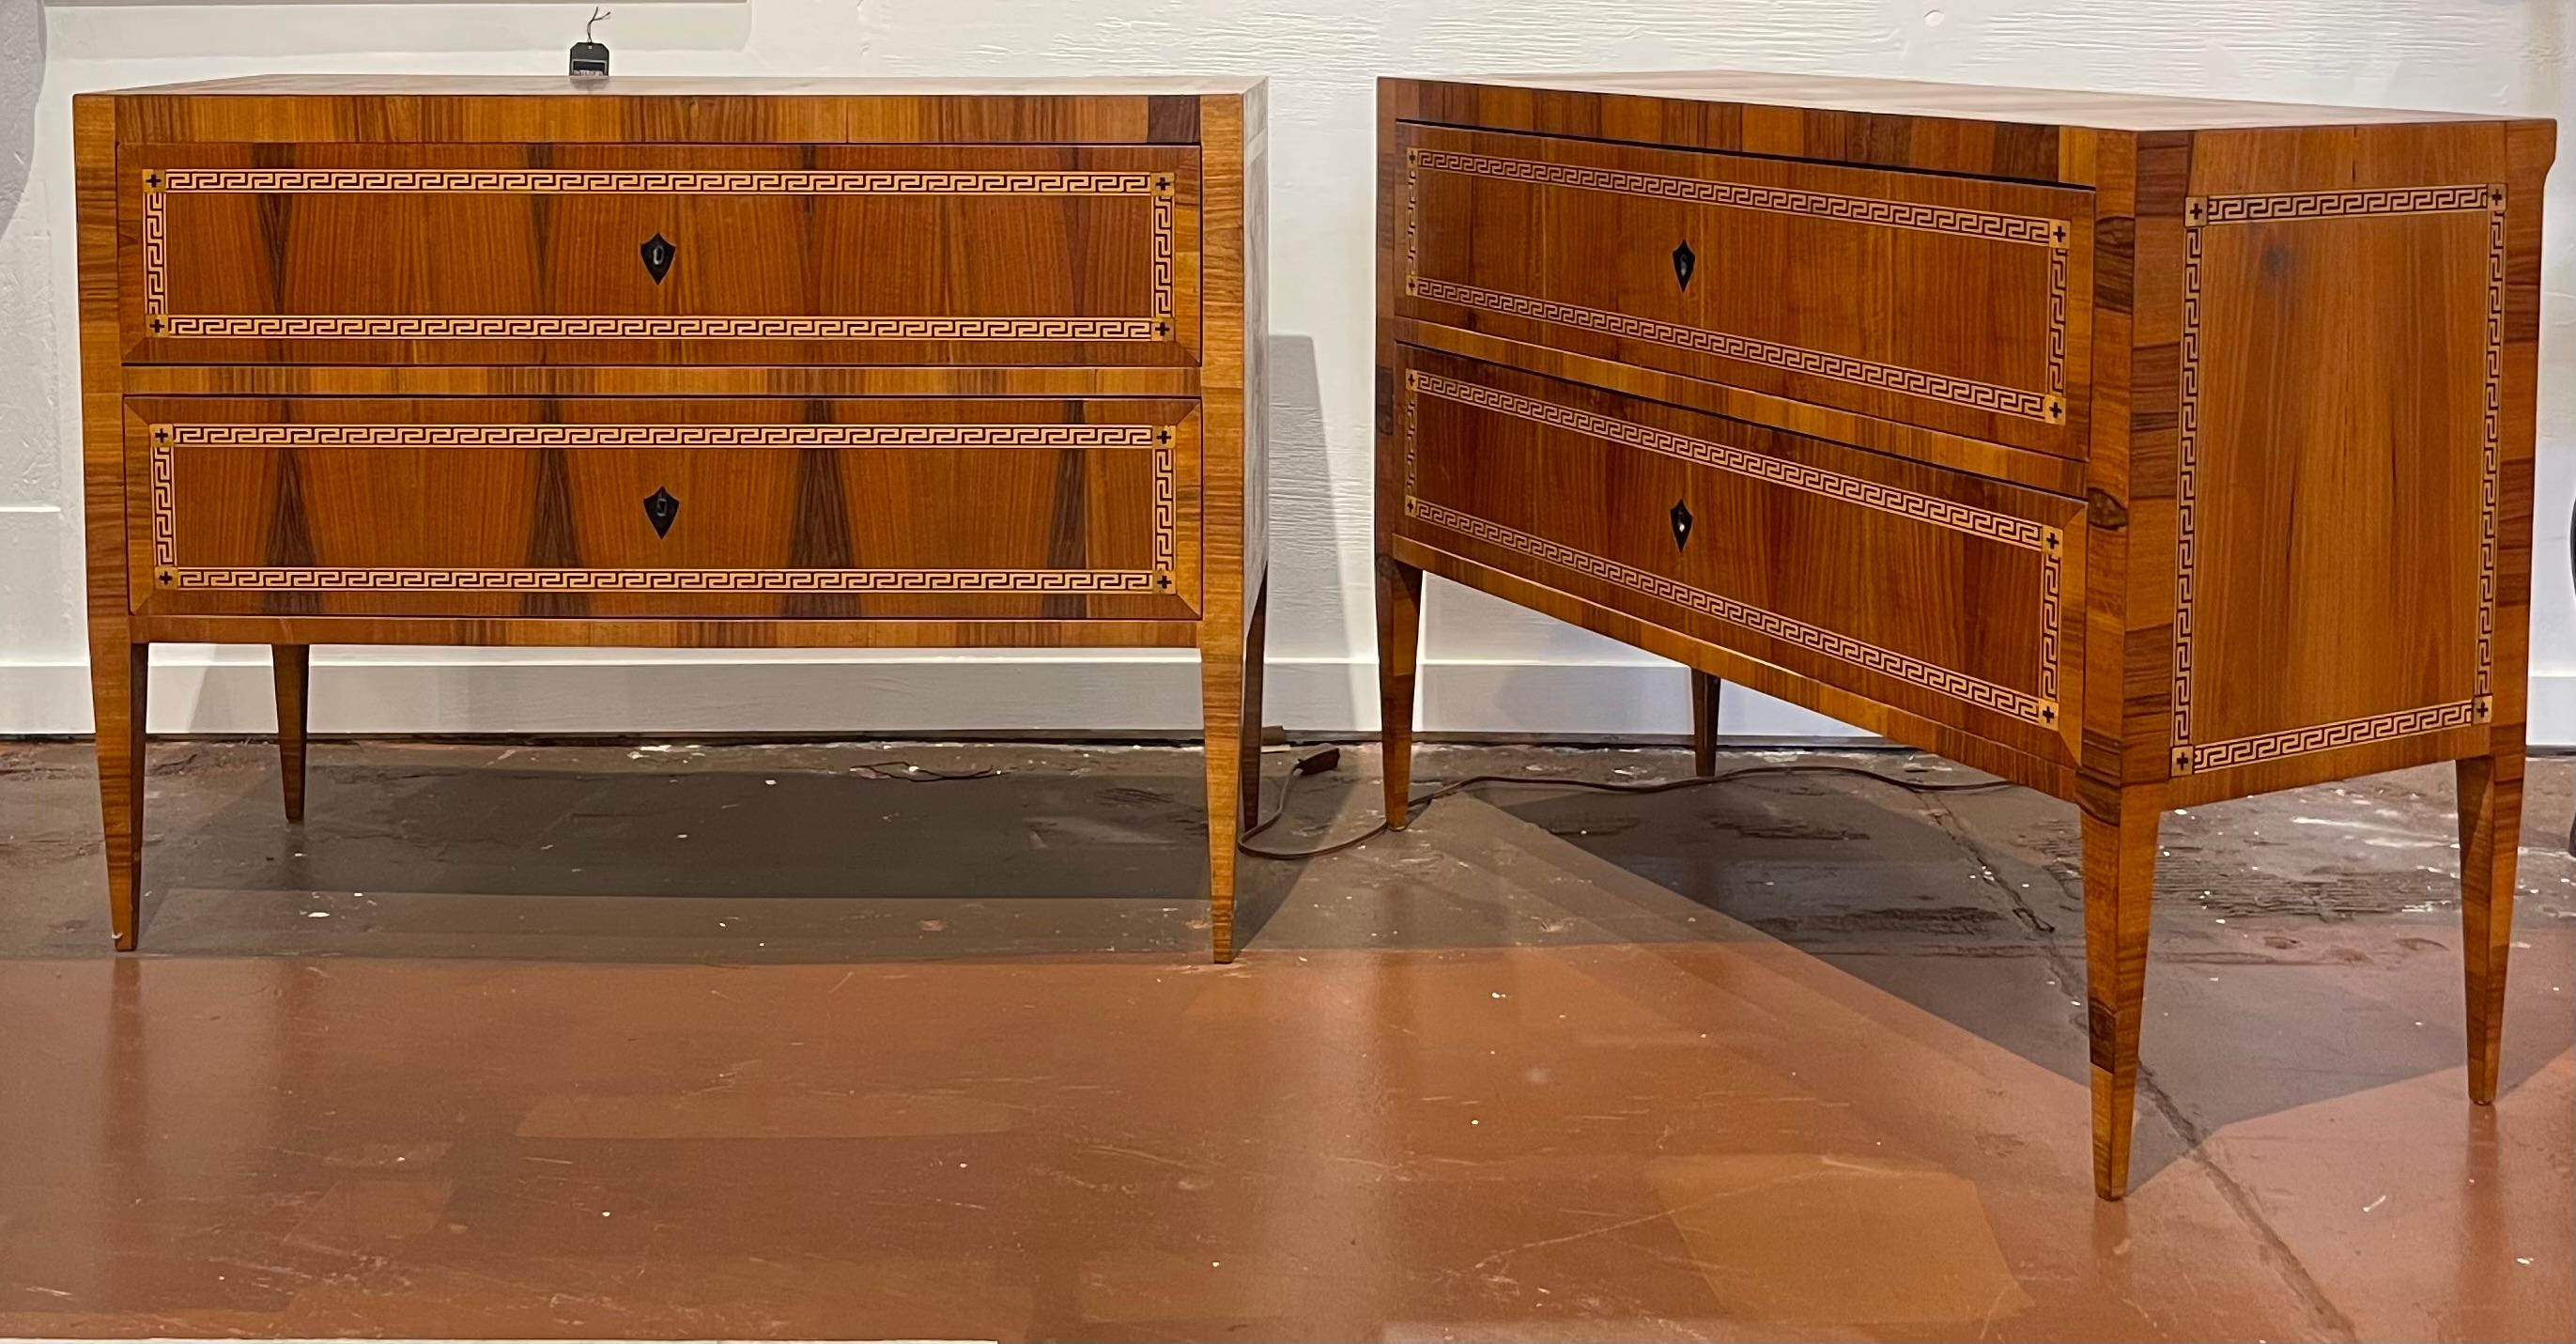 Fine quality pair of Italian Neoclassical commodes having exotic wood veneers and decorative greek key inlays. Each streamlined case holds two inlaid drawers with ebonized shield escutcheons. The drawers' interiors are beautifully lined with